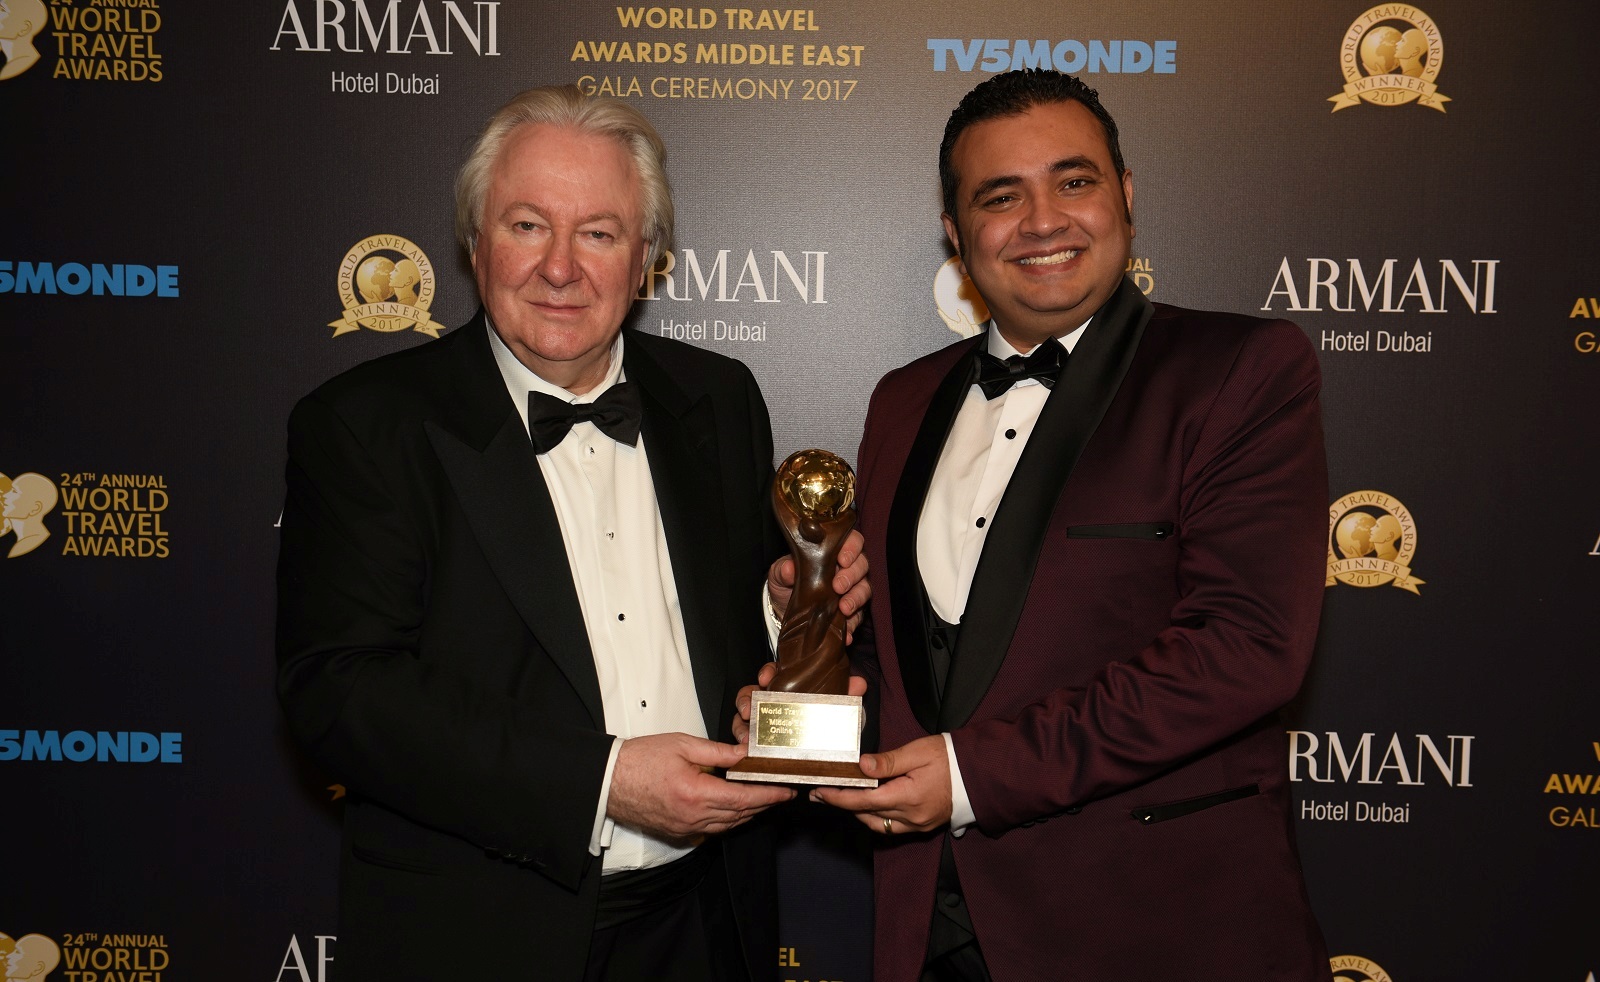 Flyin.com Crowned ‘Best Online Travel Agency’ in MENA for Third Year Running